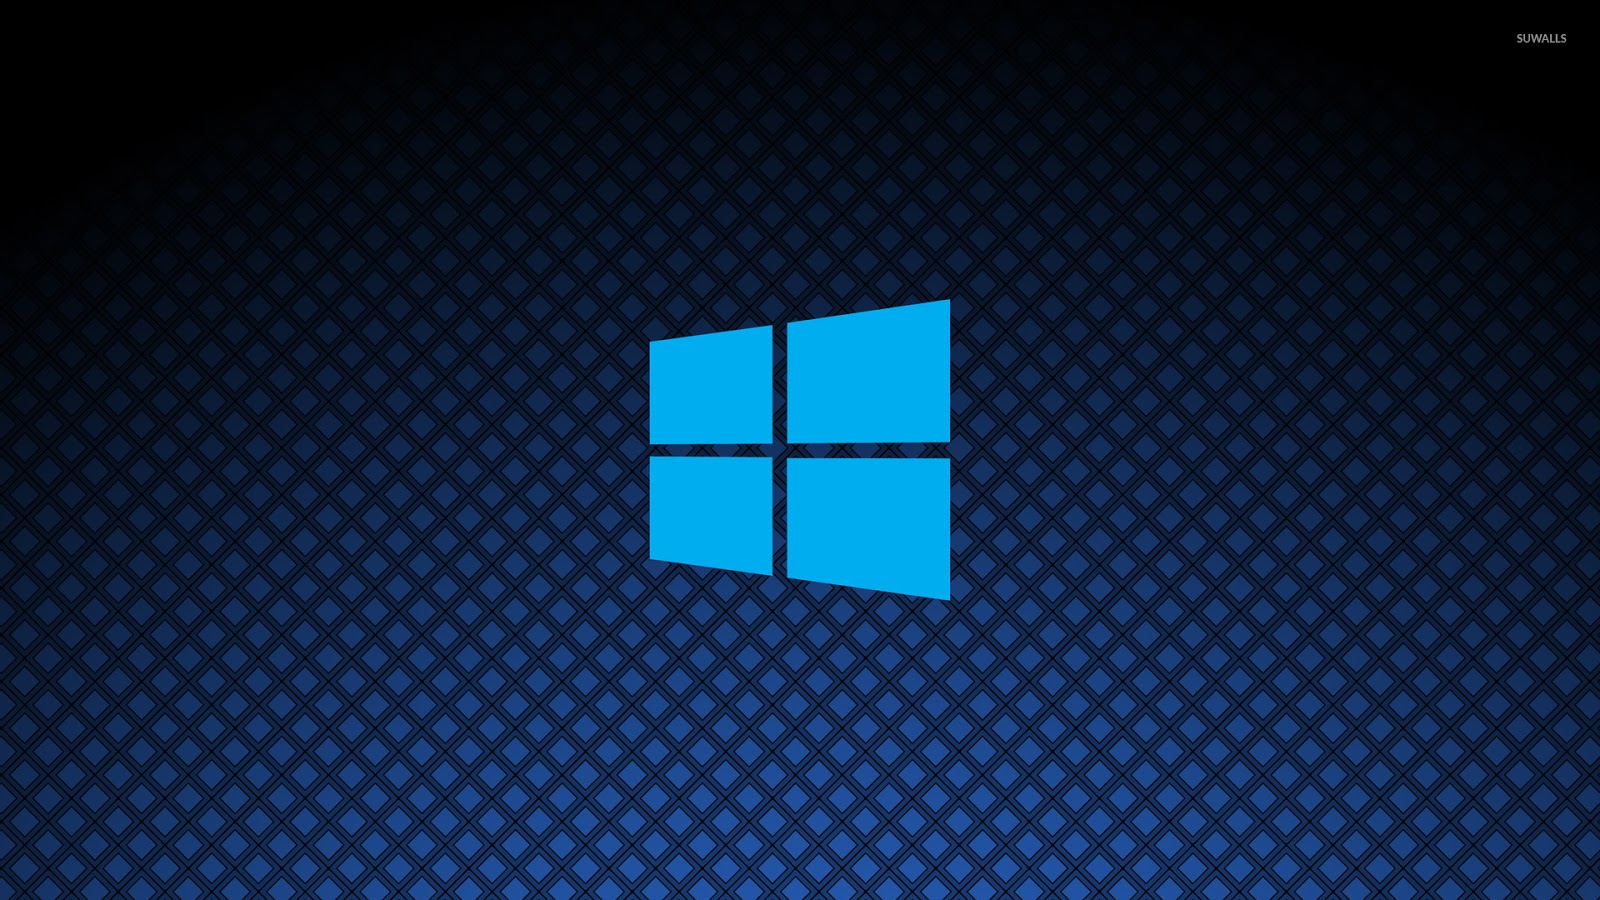 14 Windows 10 Text Logo Wallpapers | MagOne 2016